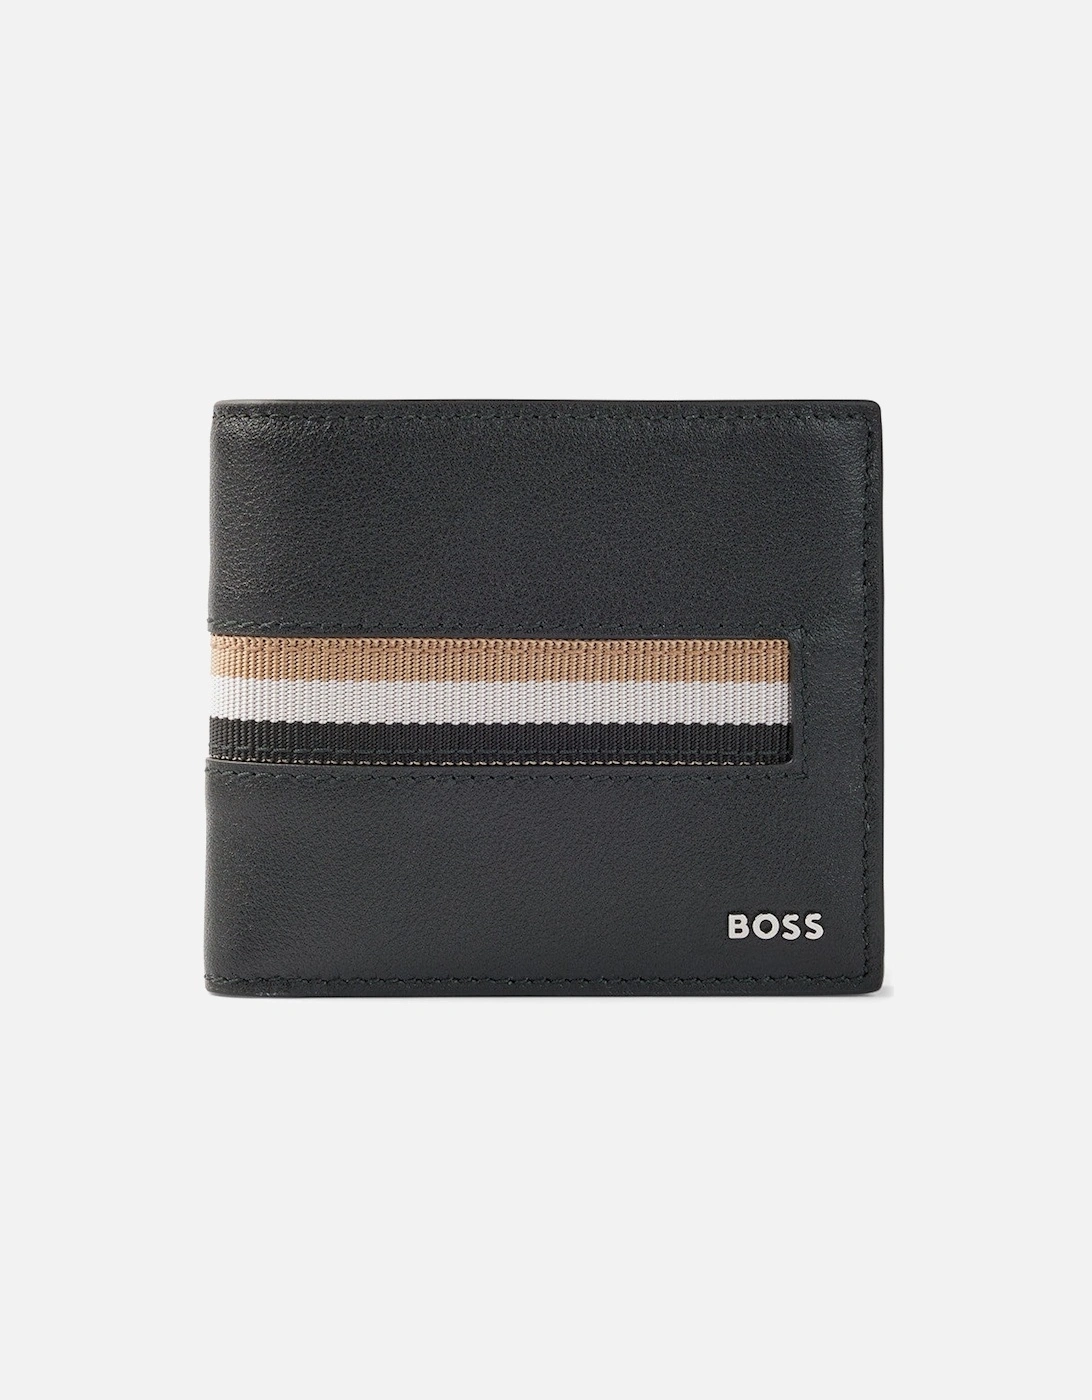 BOSS Shoes & Accessories GBBM_4 cc coin kring  001 Black, 4 of 3